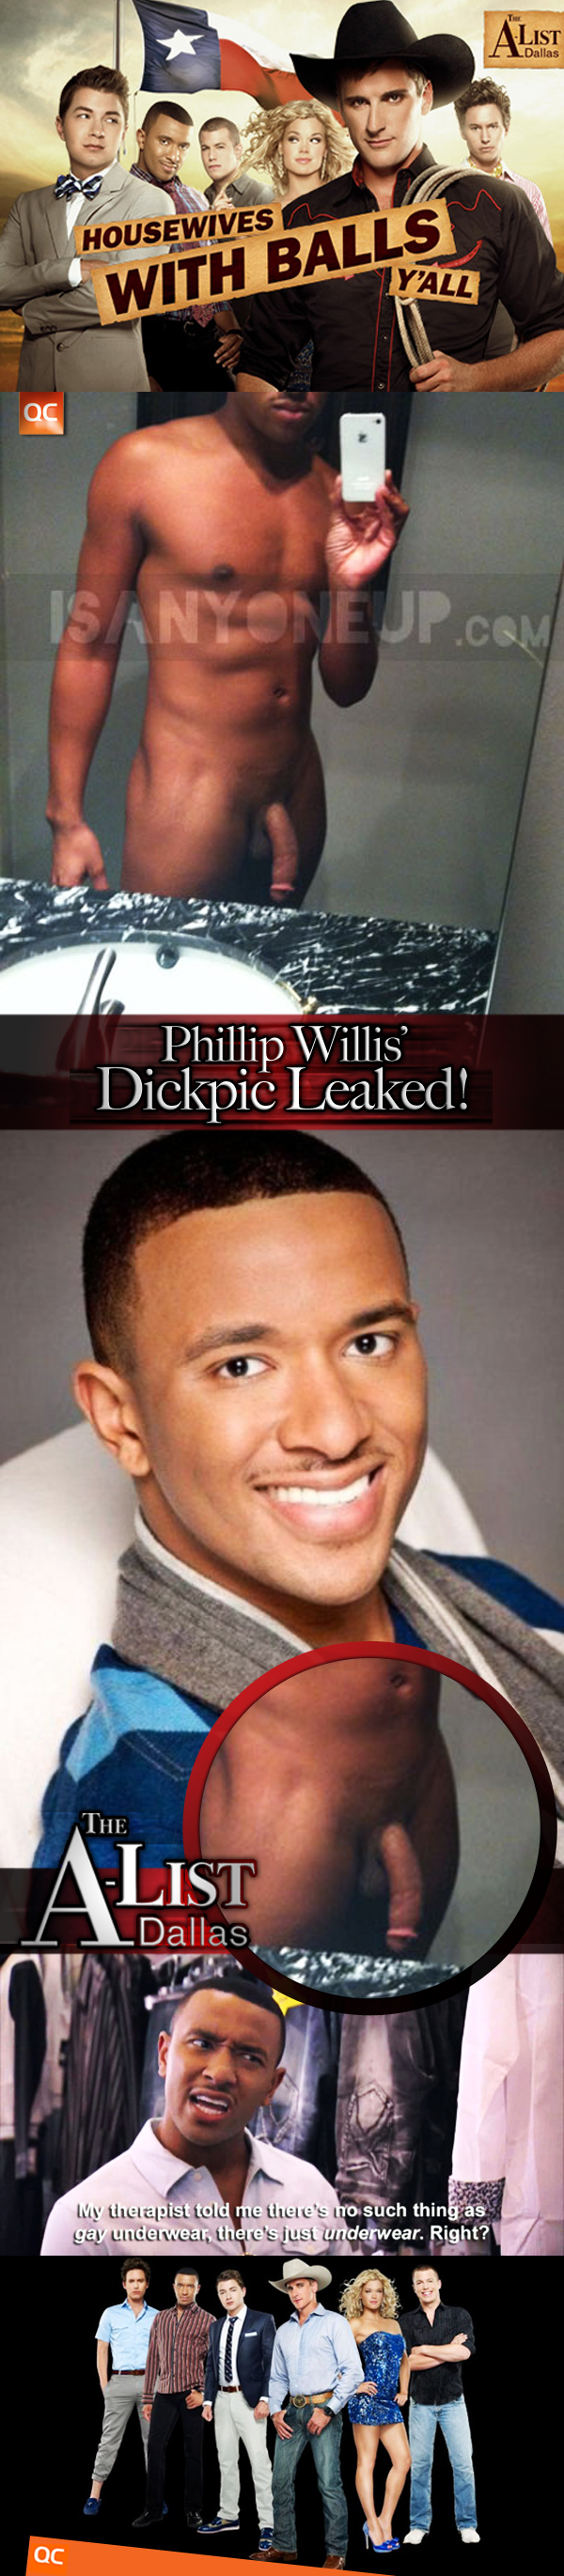 Phillip Willis, From The A-list Dallas, Dickpic Leaked!